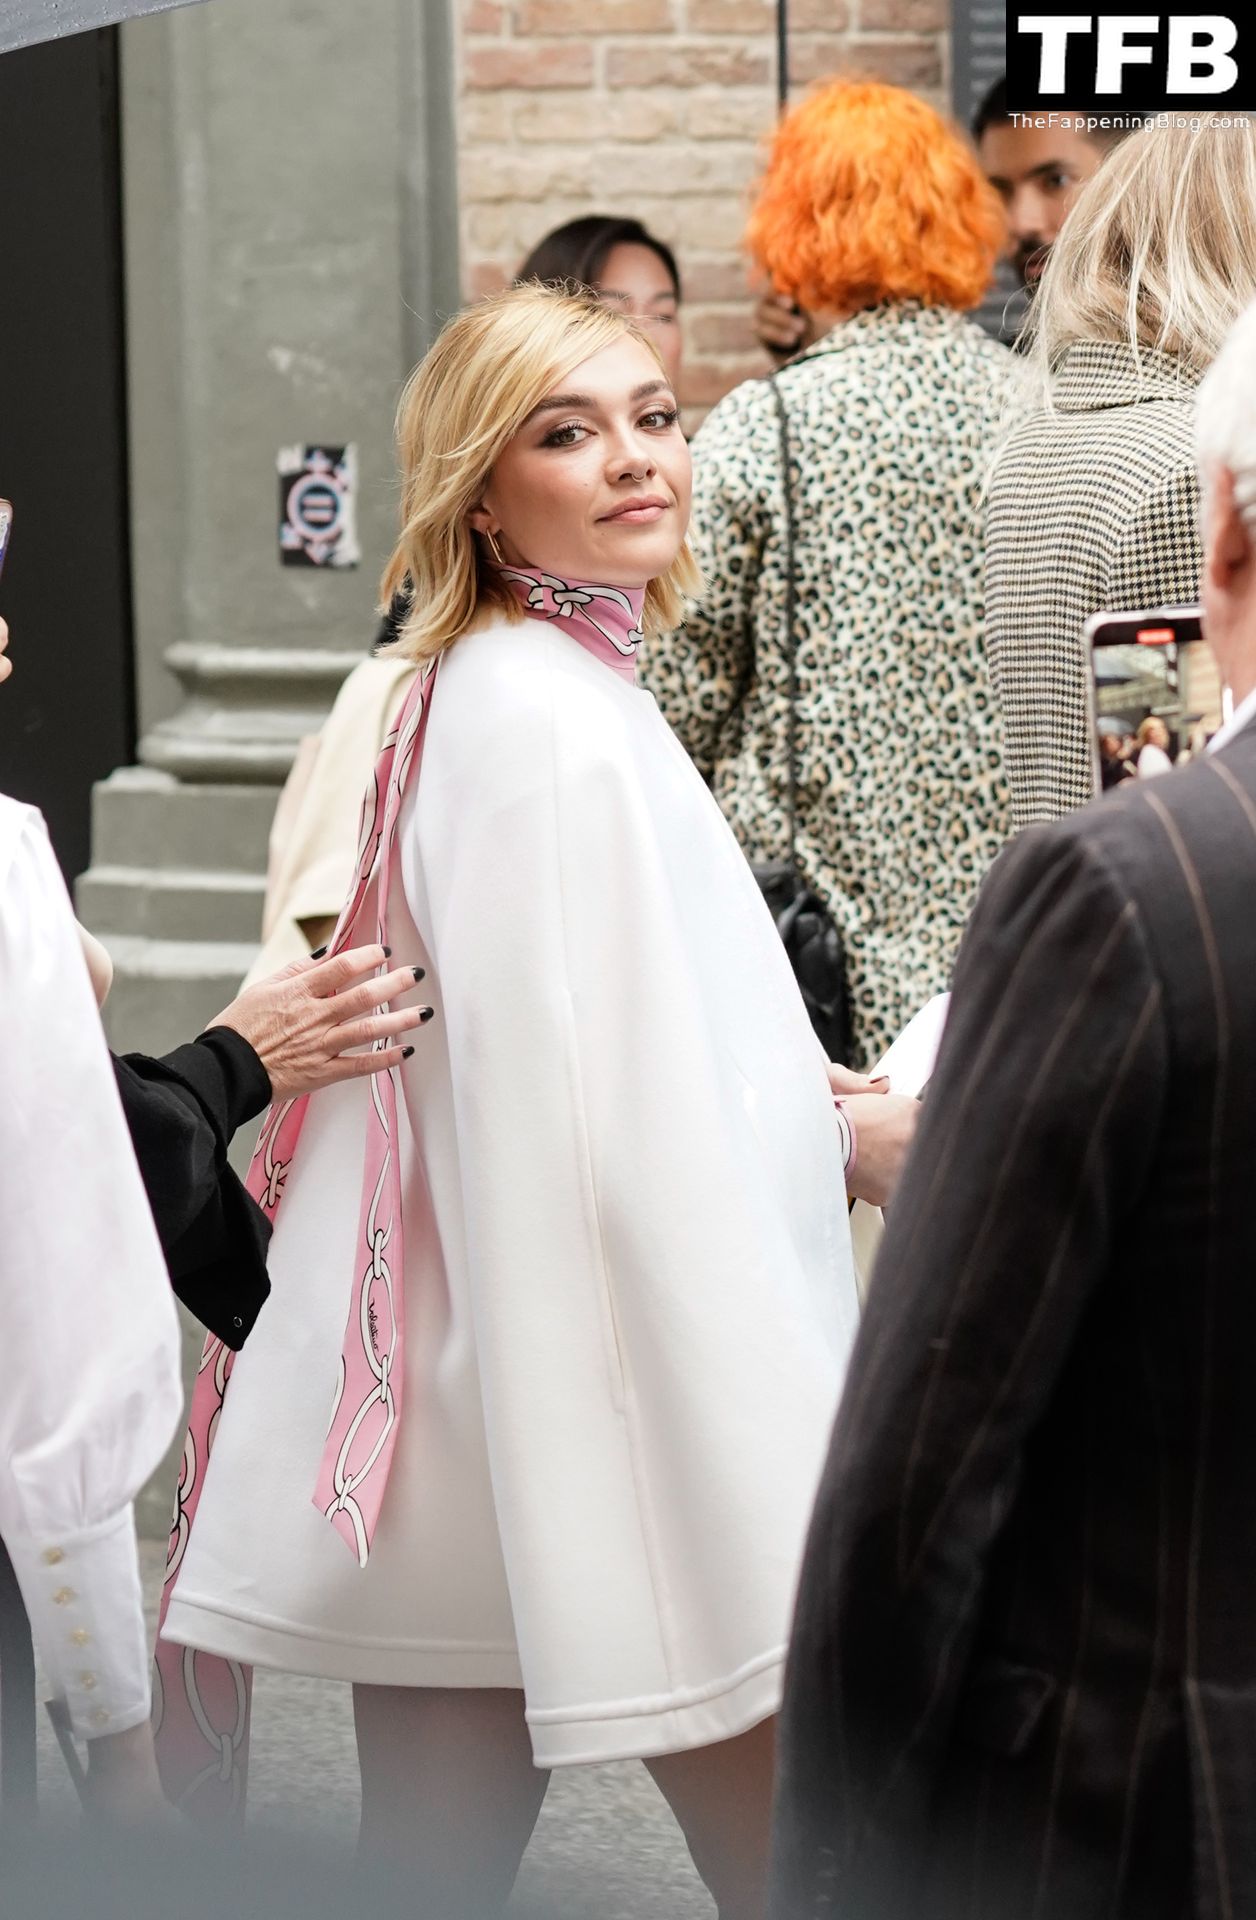 Florence-Pugh-Sexy-The-Fappening-Blog-41.jpg